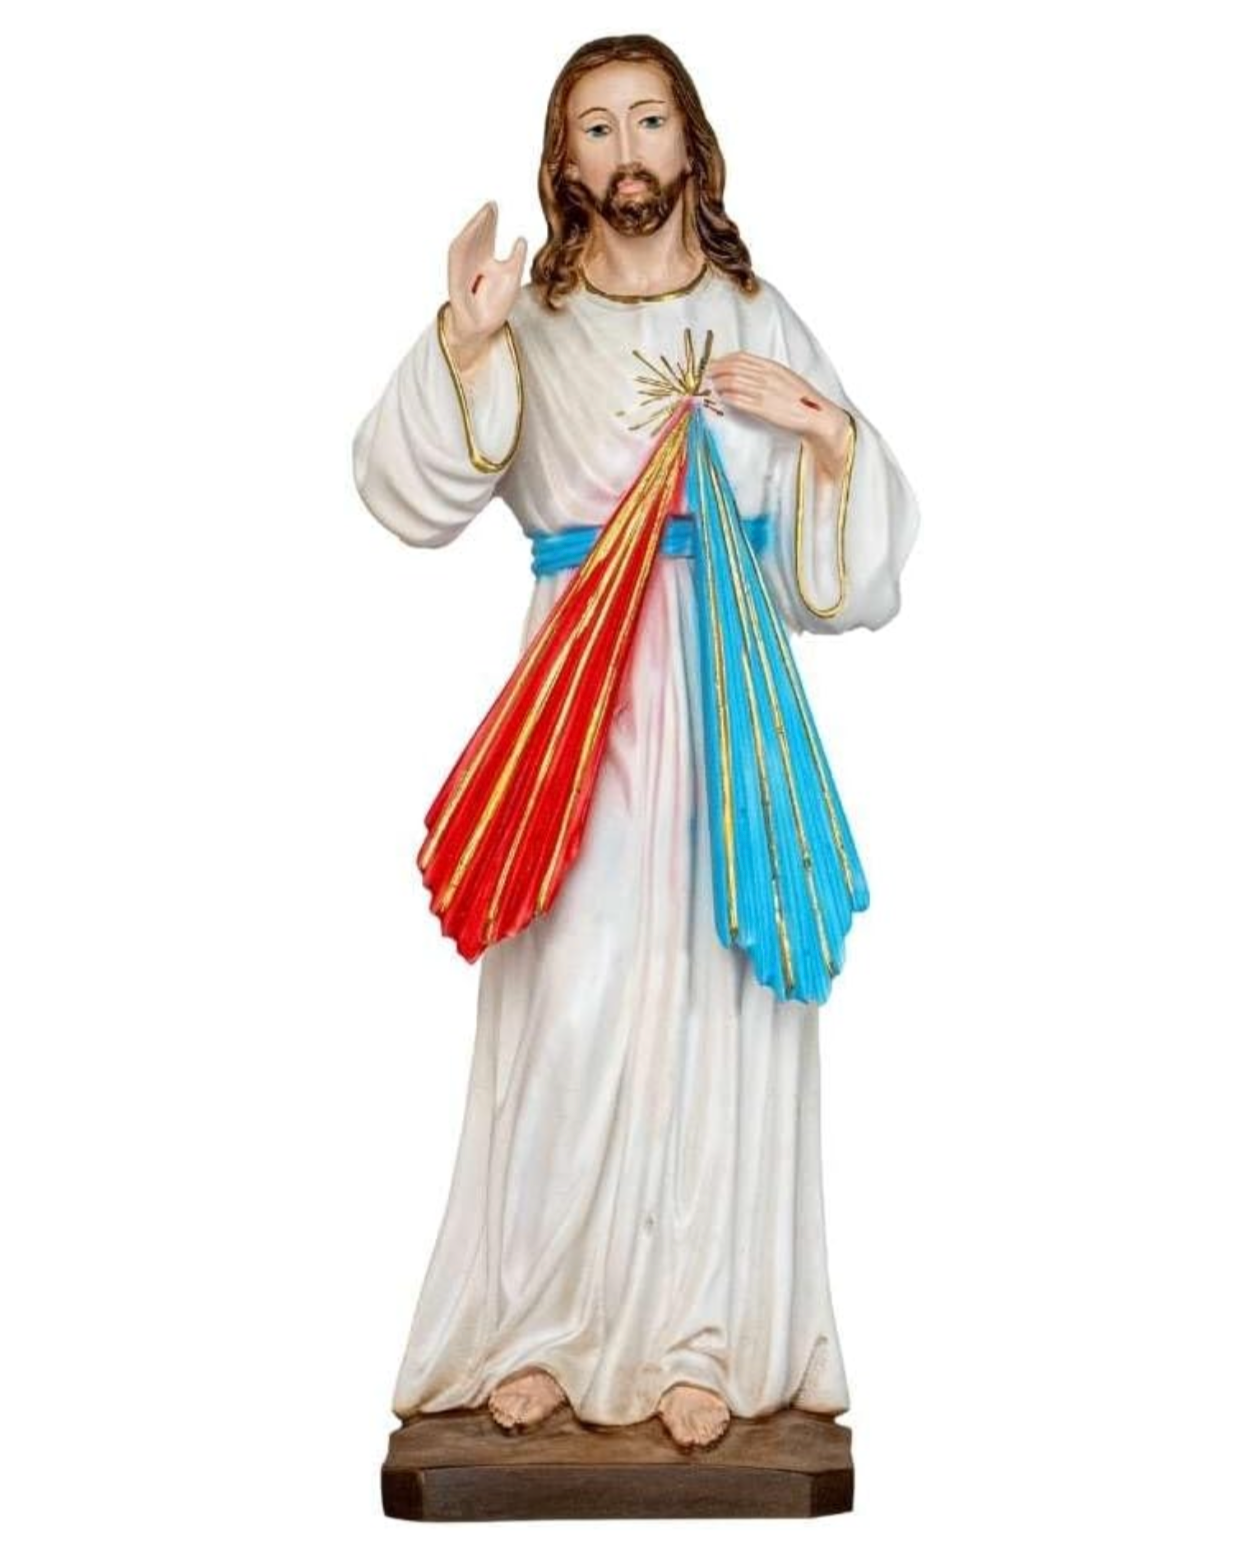 The Faith Gift Shop Divine Mercy statue- Hand Painted in Italy - Our Tuscany Collection- Imagen de la Divina Misericordia